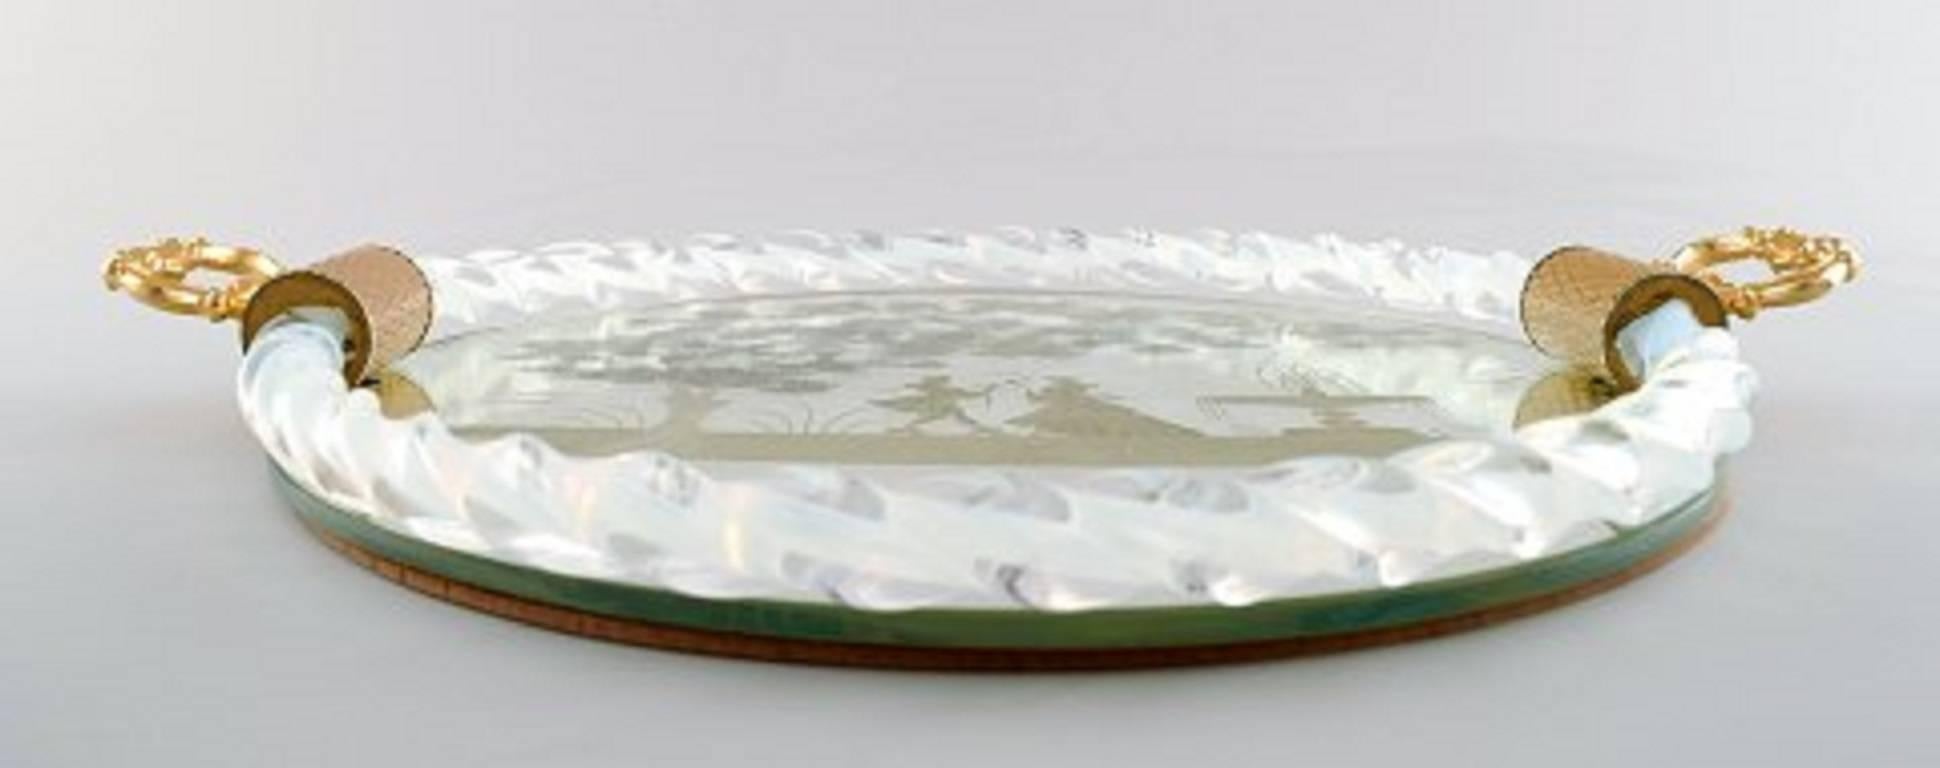 Murano, Italy, rectangular tray with mirrored plate, floral pattern with galant scene, two gold-colored metal grips on the side.
Length approx. 34 cm (with handle), 2.5 cm. deep.
In perfect condition.